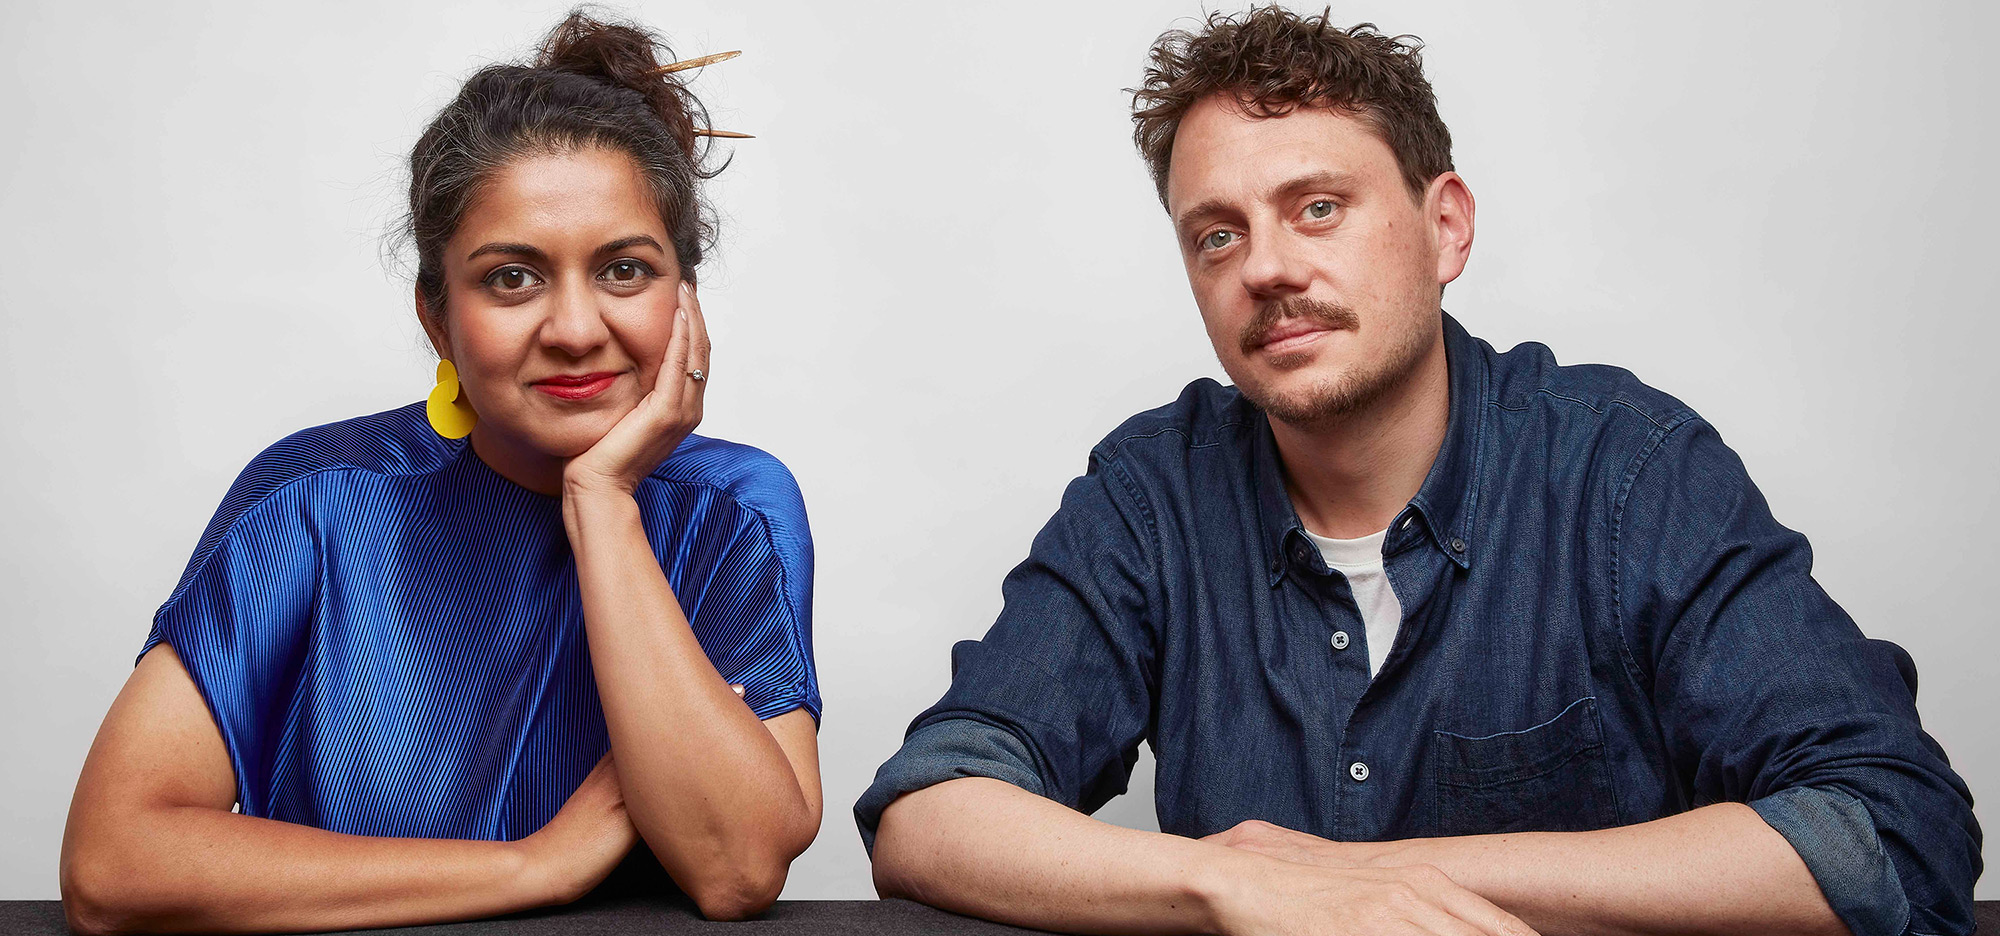 Anab Jain and Jo Ardern, futurists and co-founders of Superflux